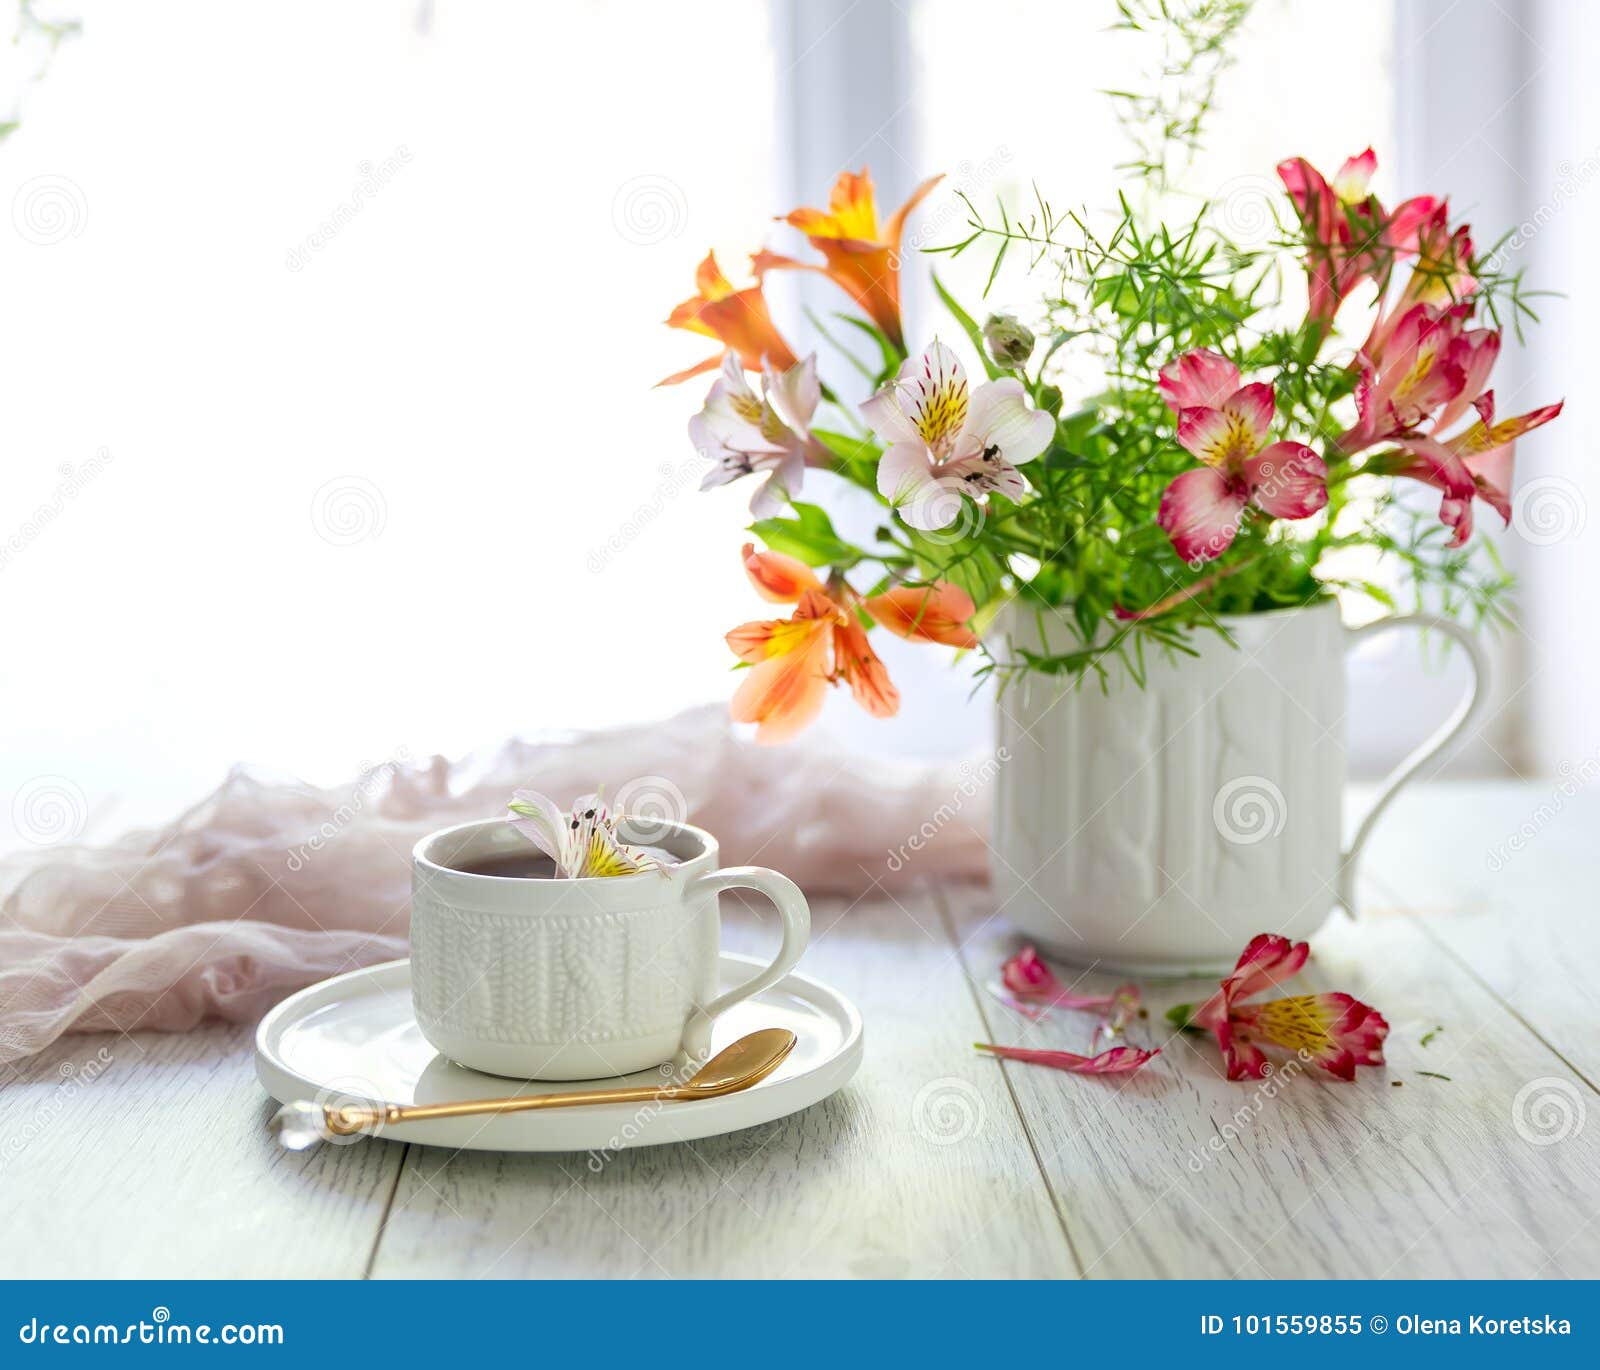 white cup with tea on the table. flowers nearby